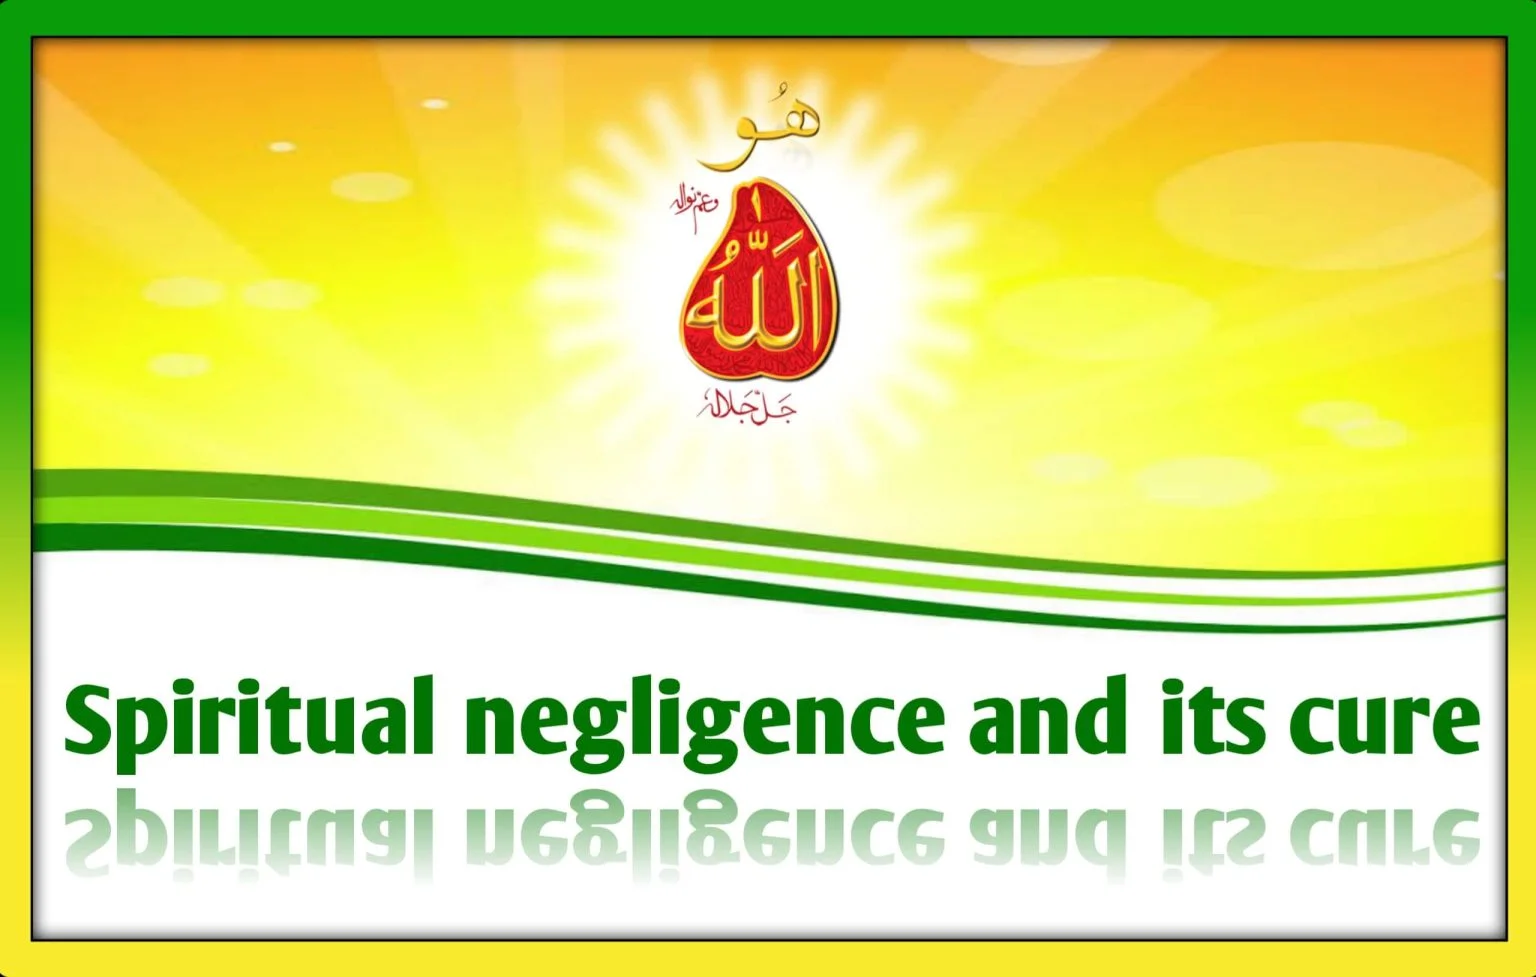 SPIRITUAL NEGLIGENCE AND ITS CURE